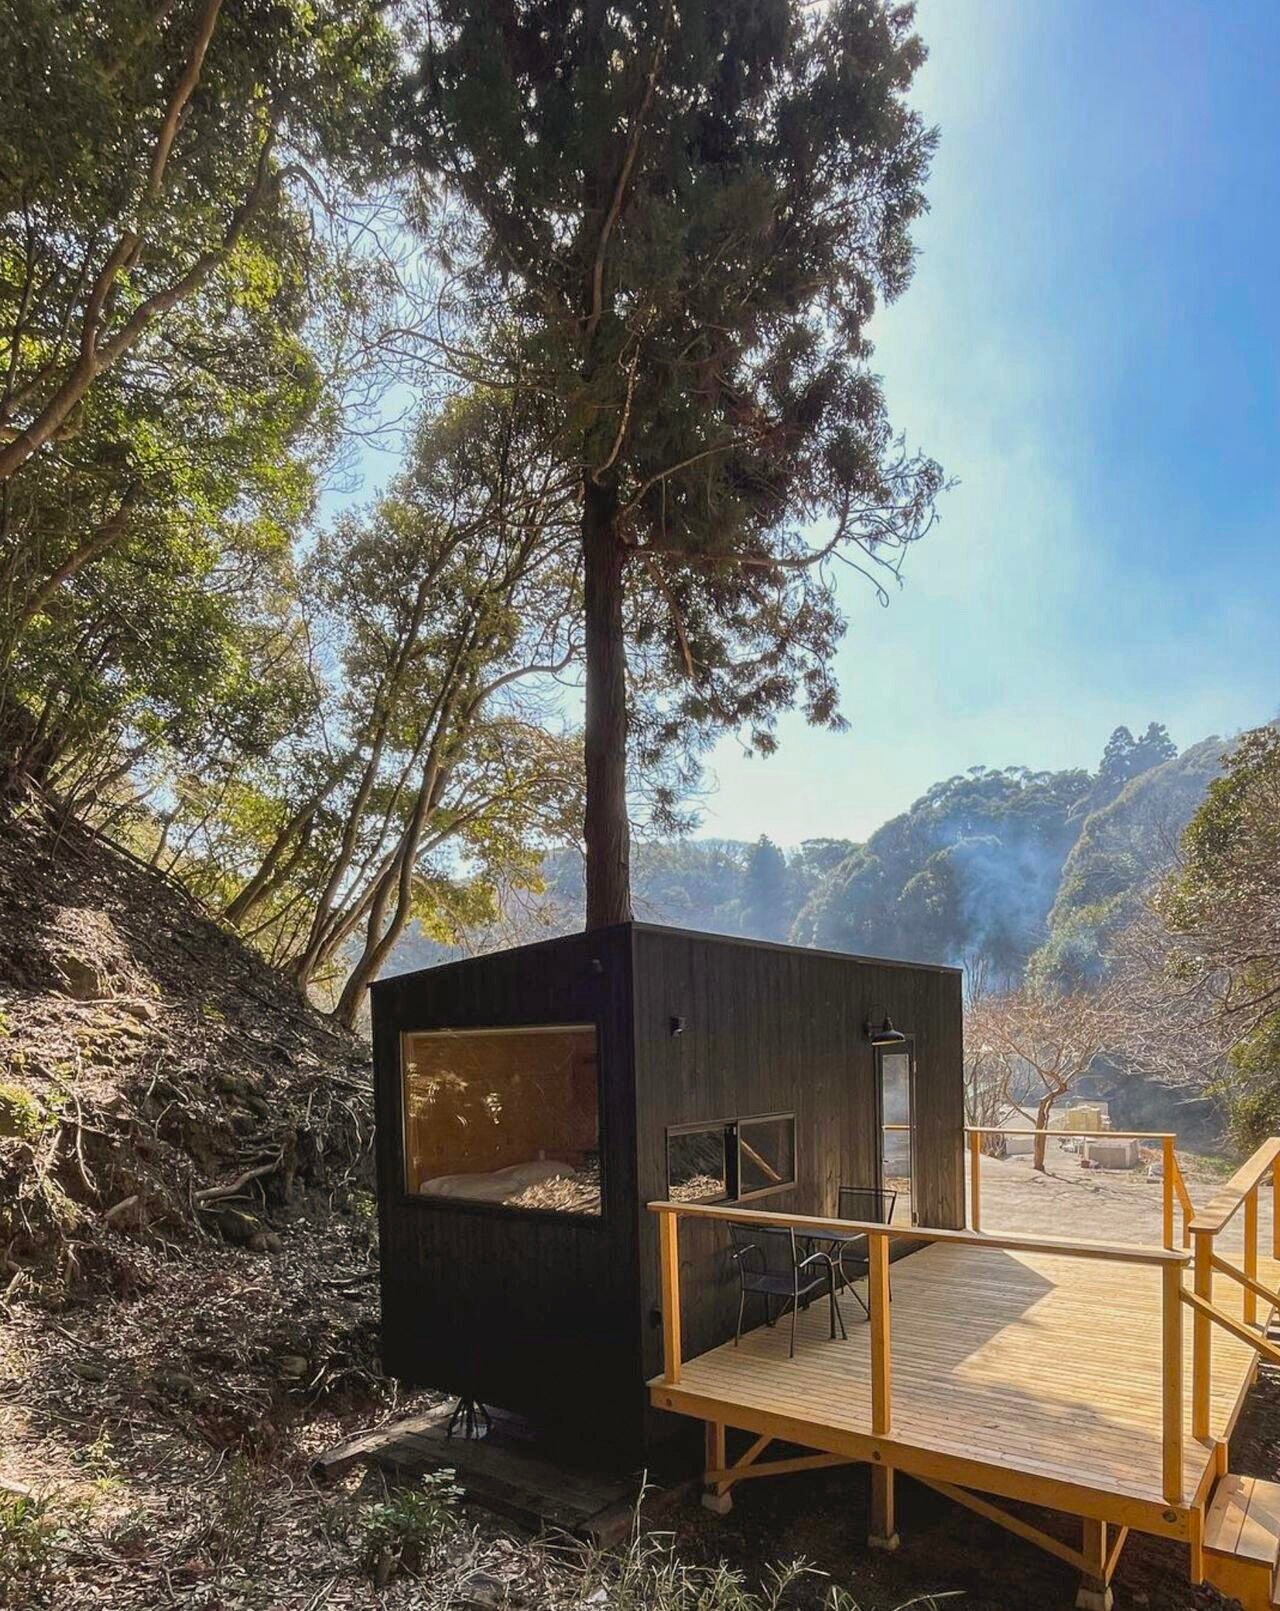 The cabin in Katsuura sits against a backdrop of lush greenery and pristine beaches and is part of an innovative initiative to breathe new life into Japan’s forgotten properties. Photo: SCMP Handout